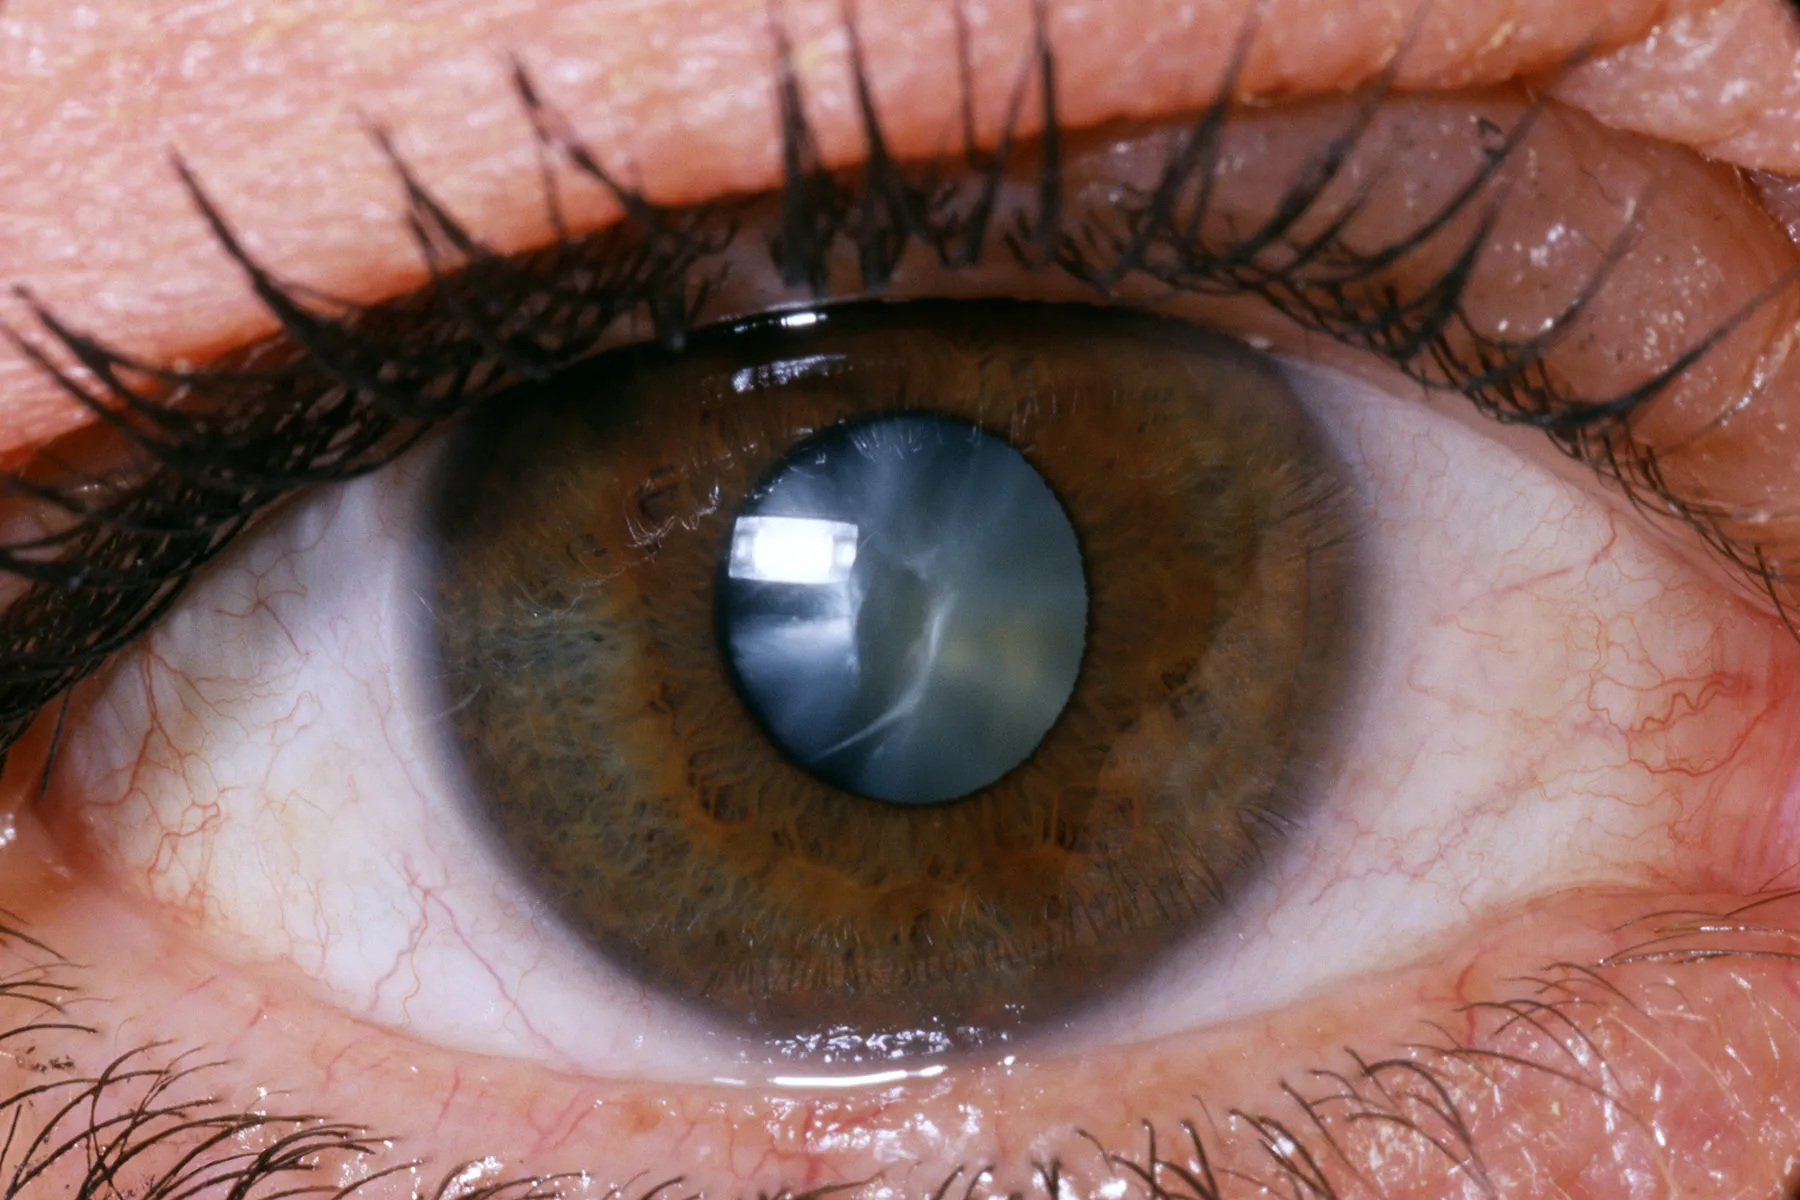 How long should you use eye drops after cataract surgery What To Expect With Cataract Surgery